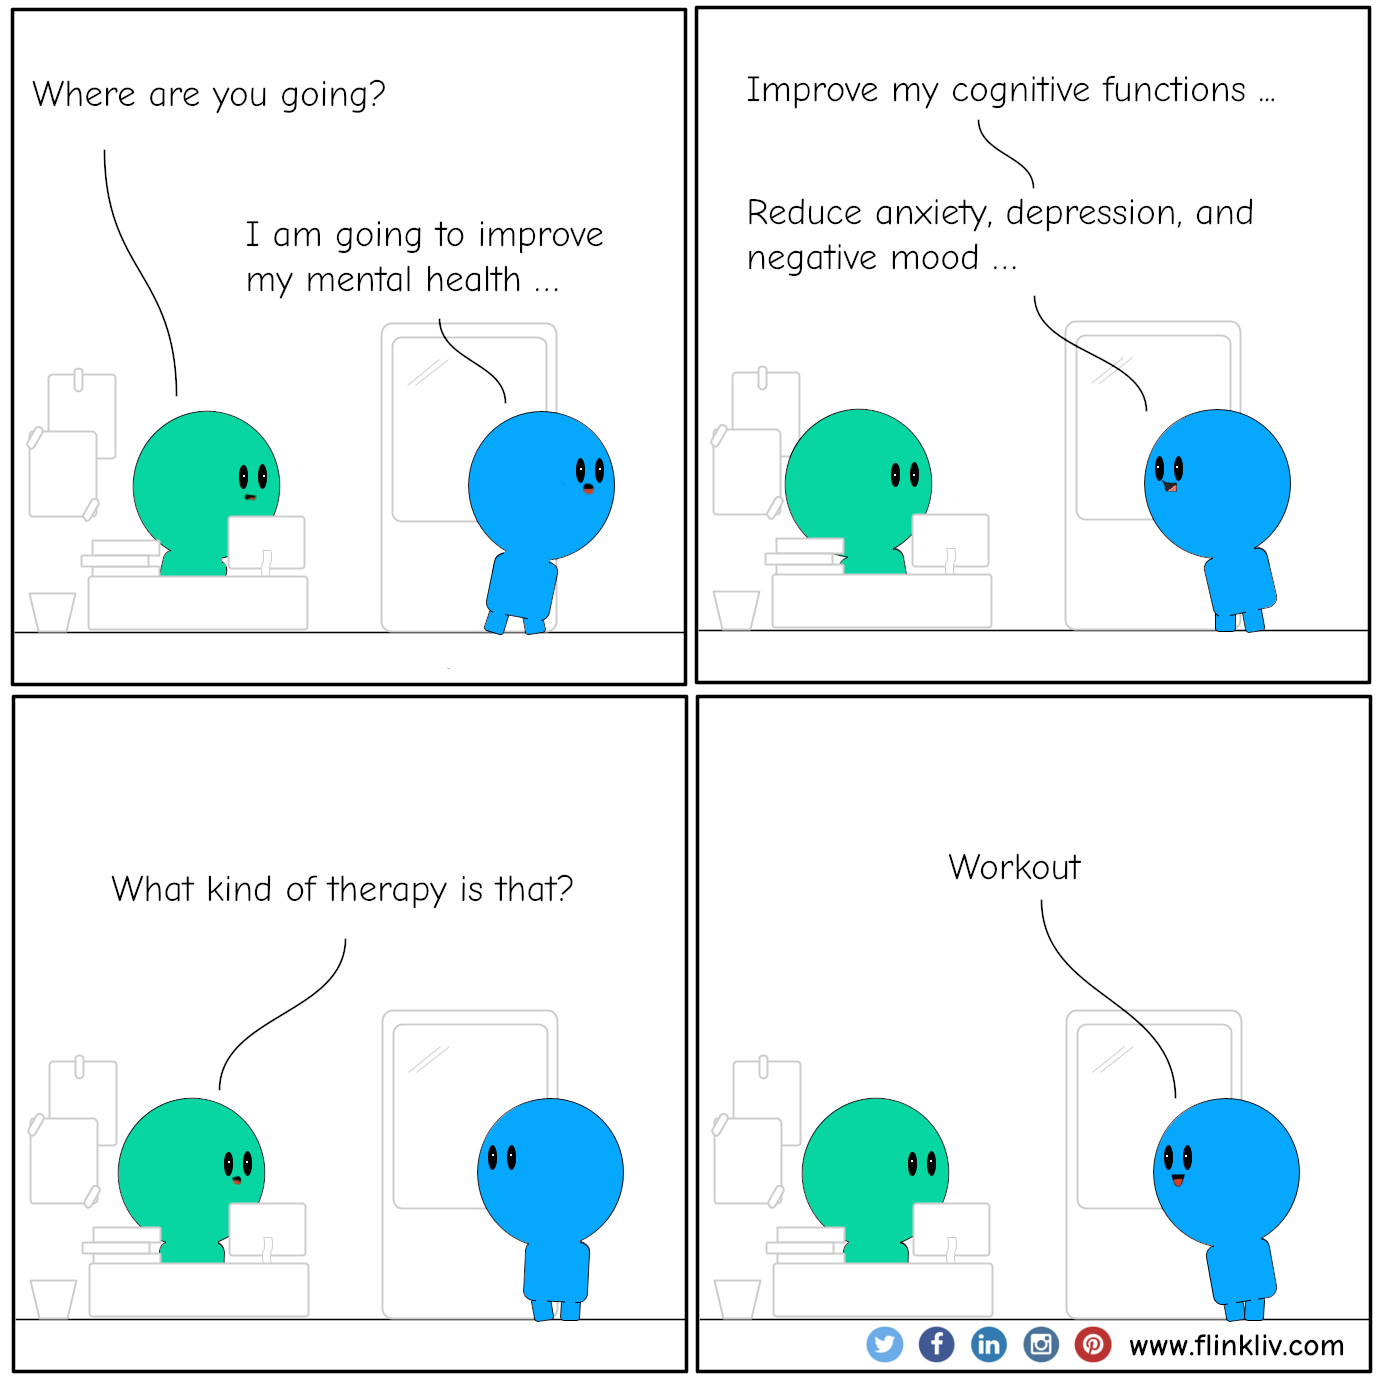 Conversation between A and B about the benefits of workout. A: Where are you going? B: I am going to improve my mental health and cognitive function. Reduce anxiety, depression, and negative mood A: What kind of therapy is that? B: Workout. By flinkliv.com